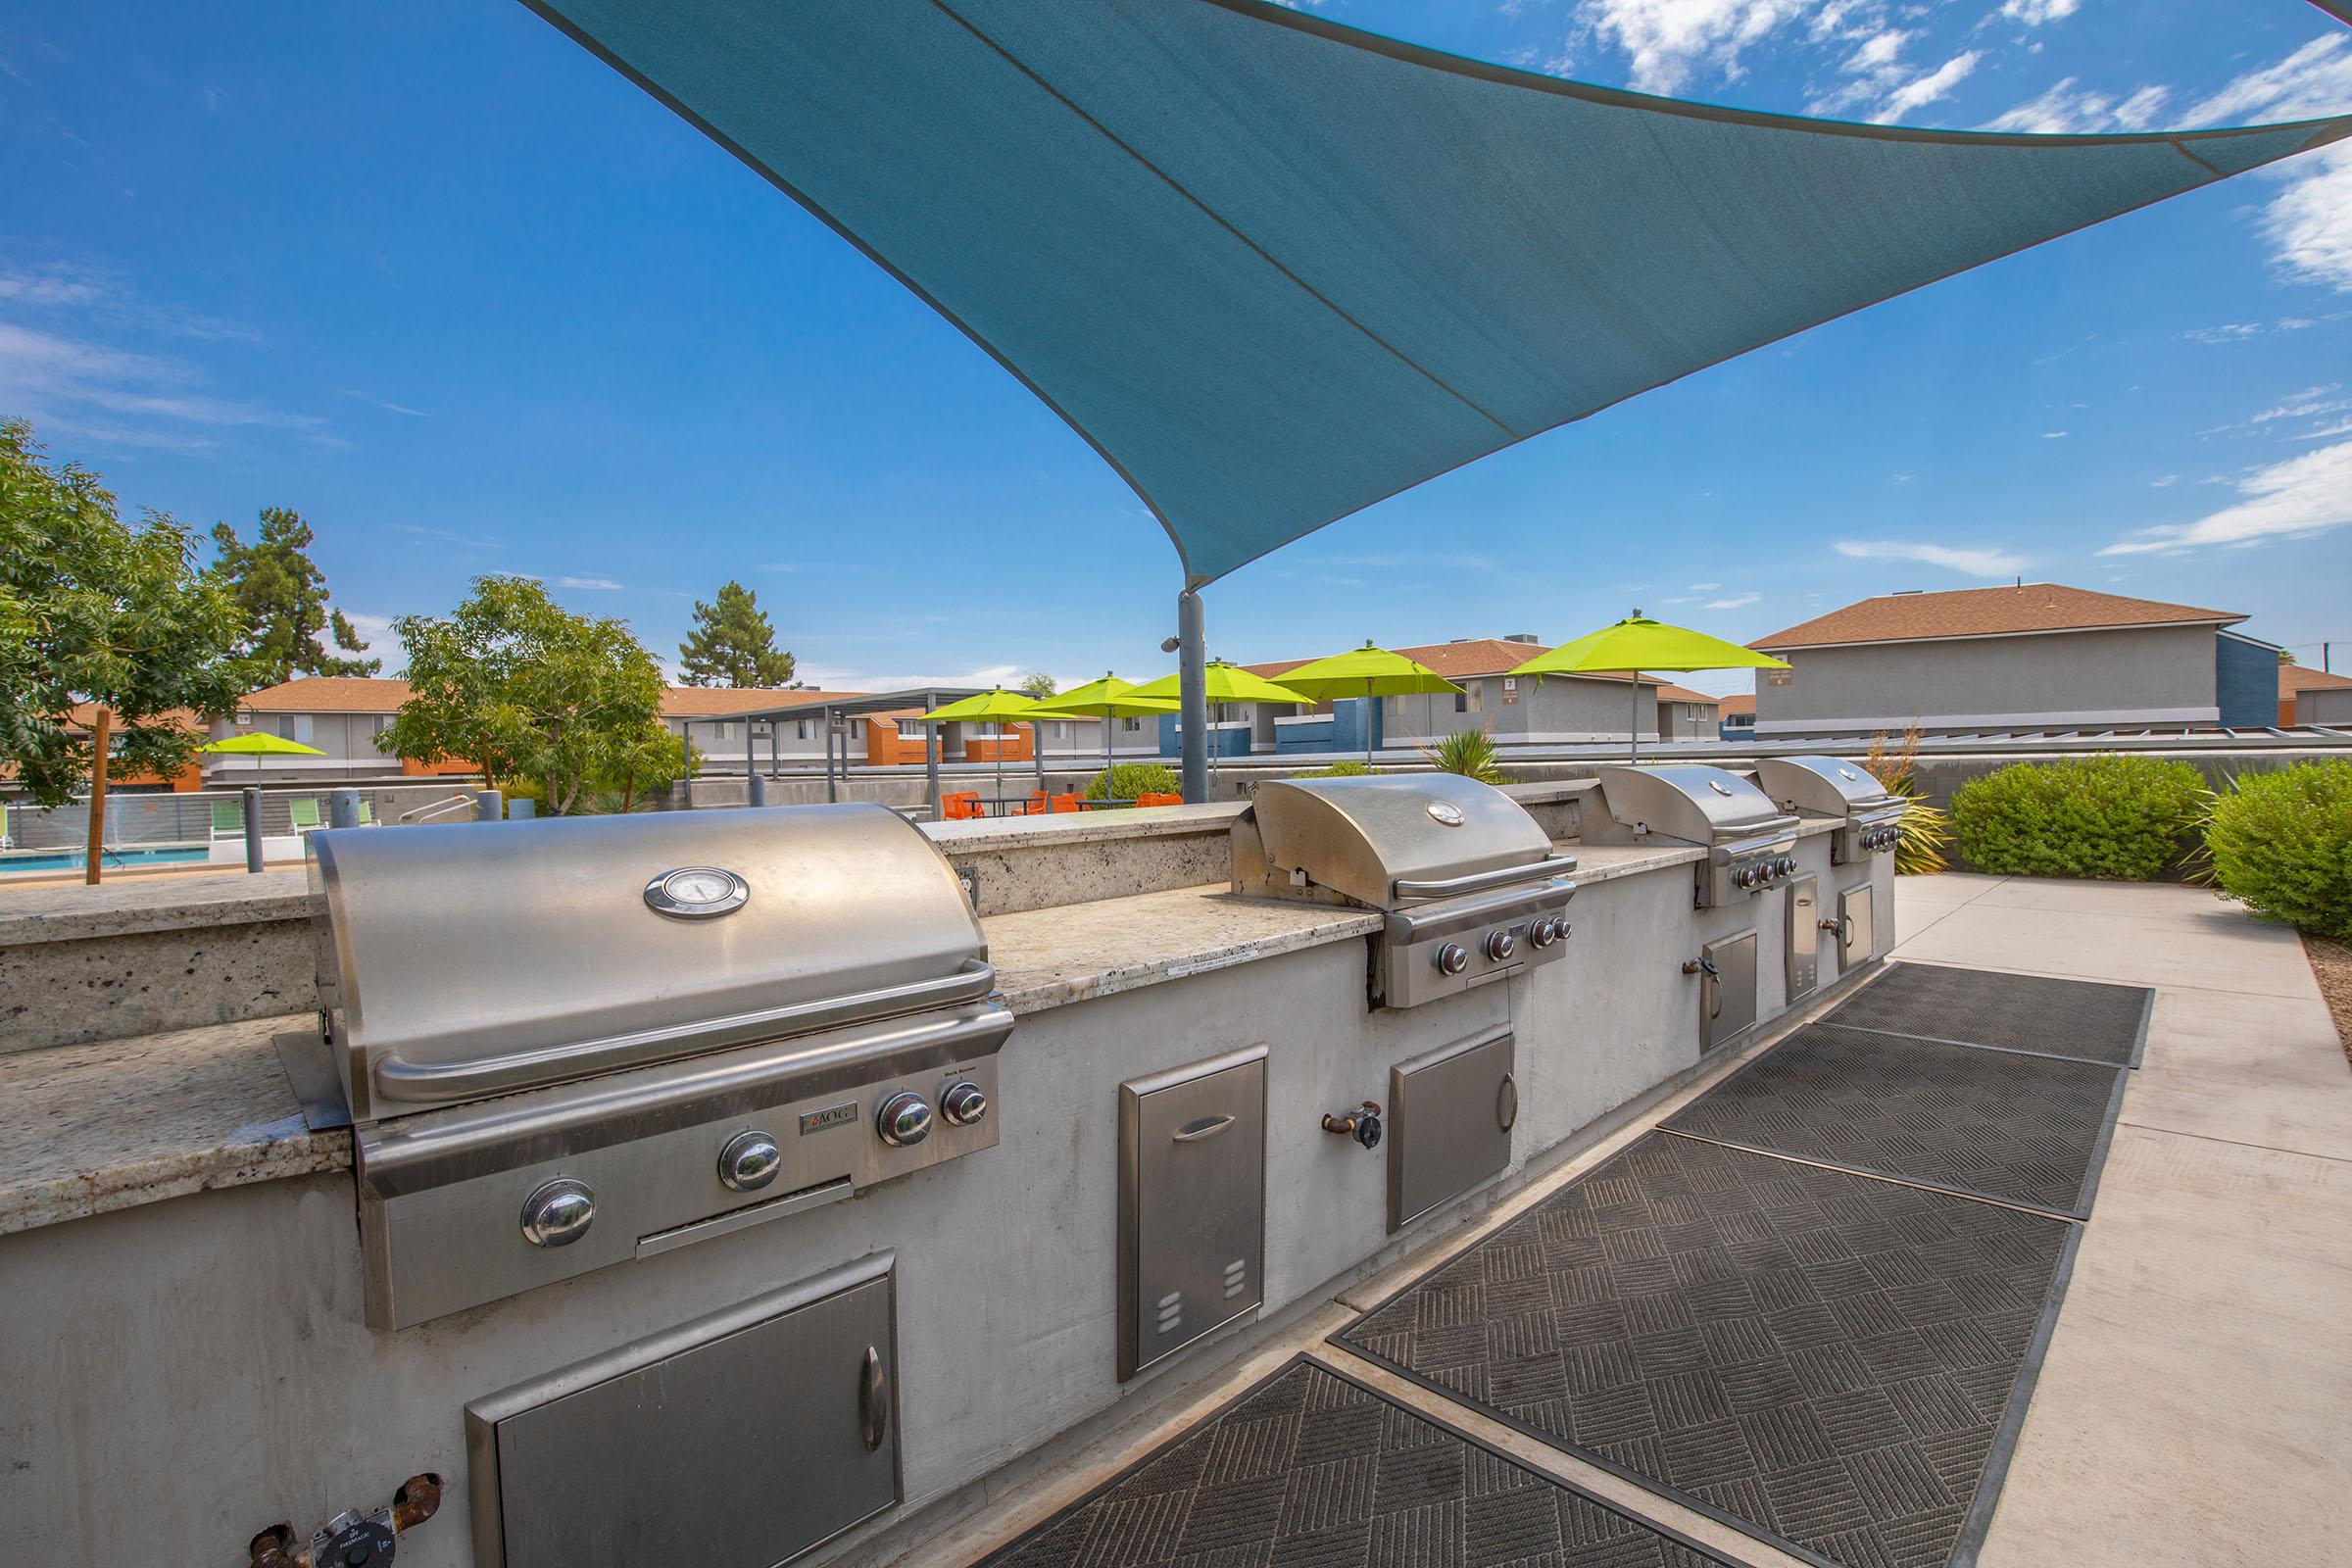 Outdoor patio bar top with 4 stainless steel grills and sunshade cover